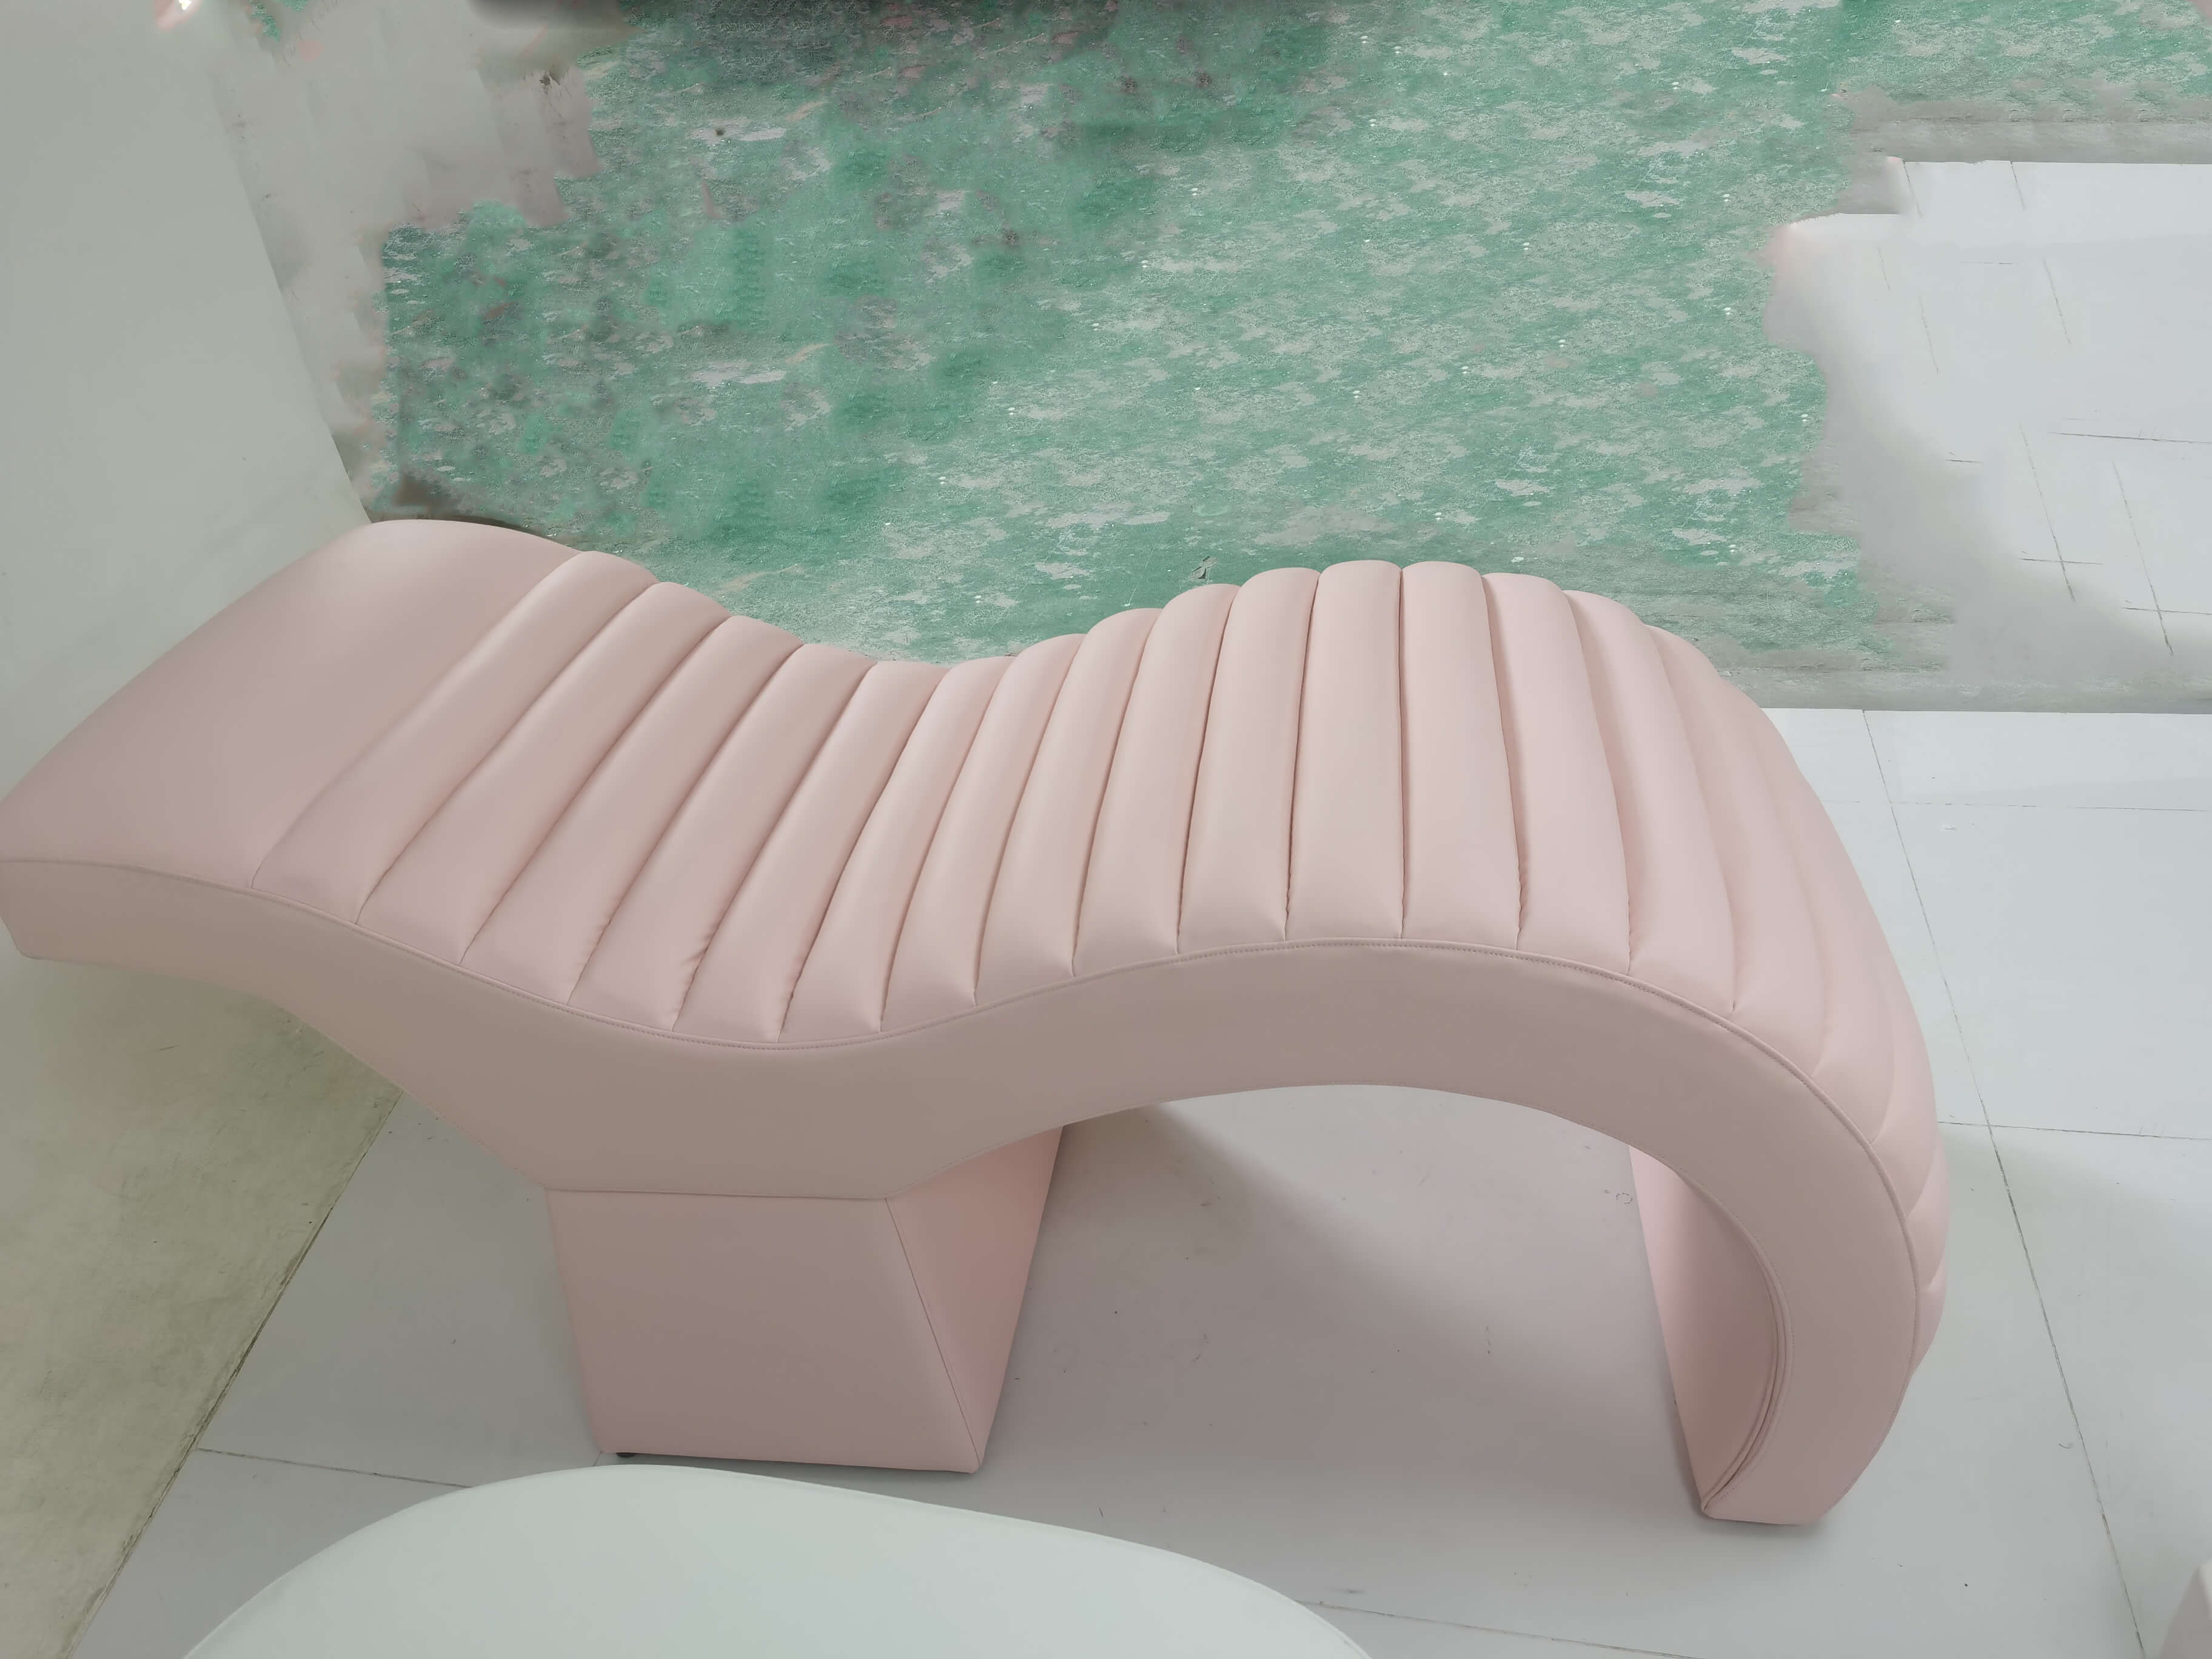 Yoocell curved beauty bed real shot for eyelash (1)